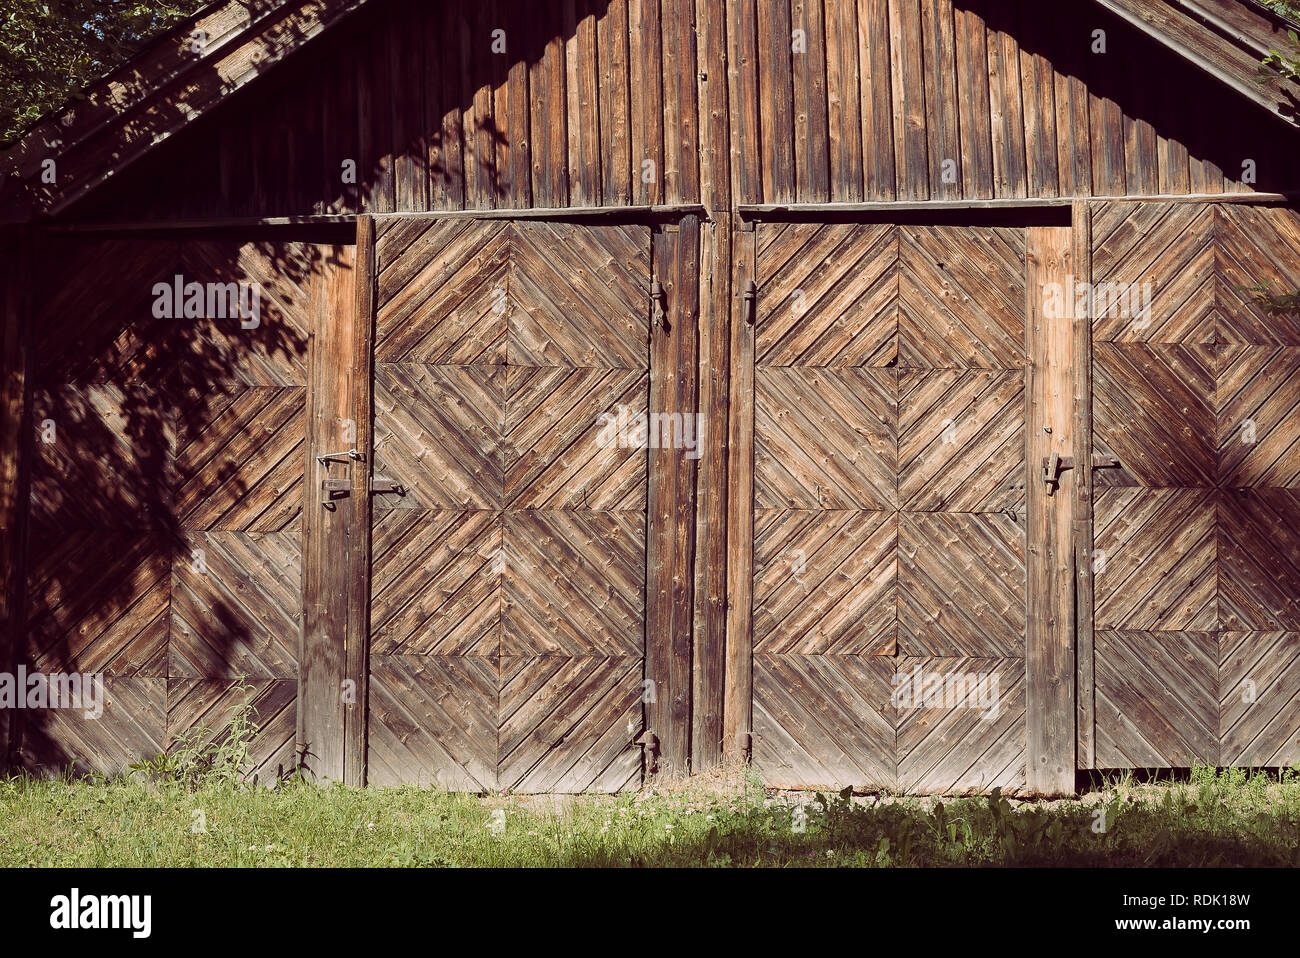 An aged, rural farm building with two doors and rusted locks with a rustic natural wooden facade and decorative woodwork in a creative pattern Stock Photo